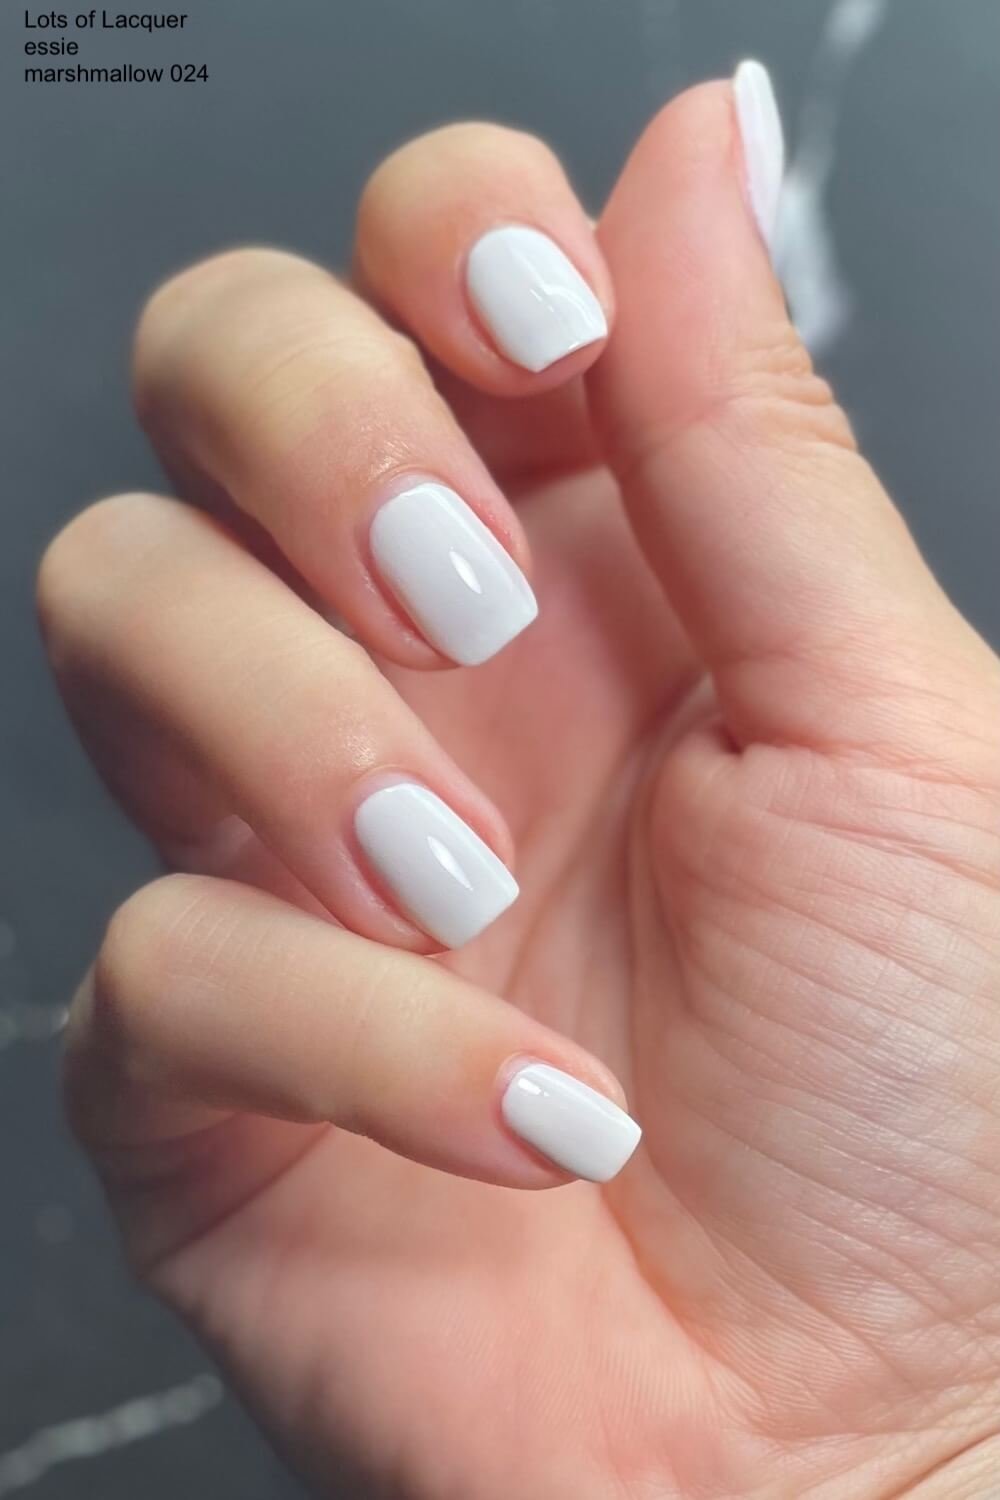 Milky White Nail Trend: Get the Look & Best Polishes